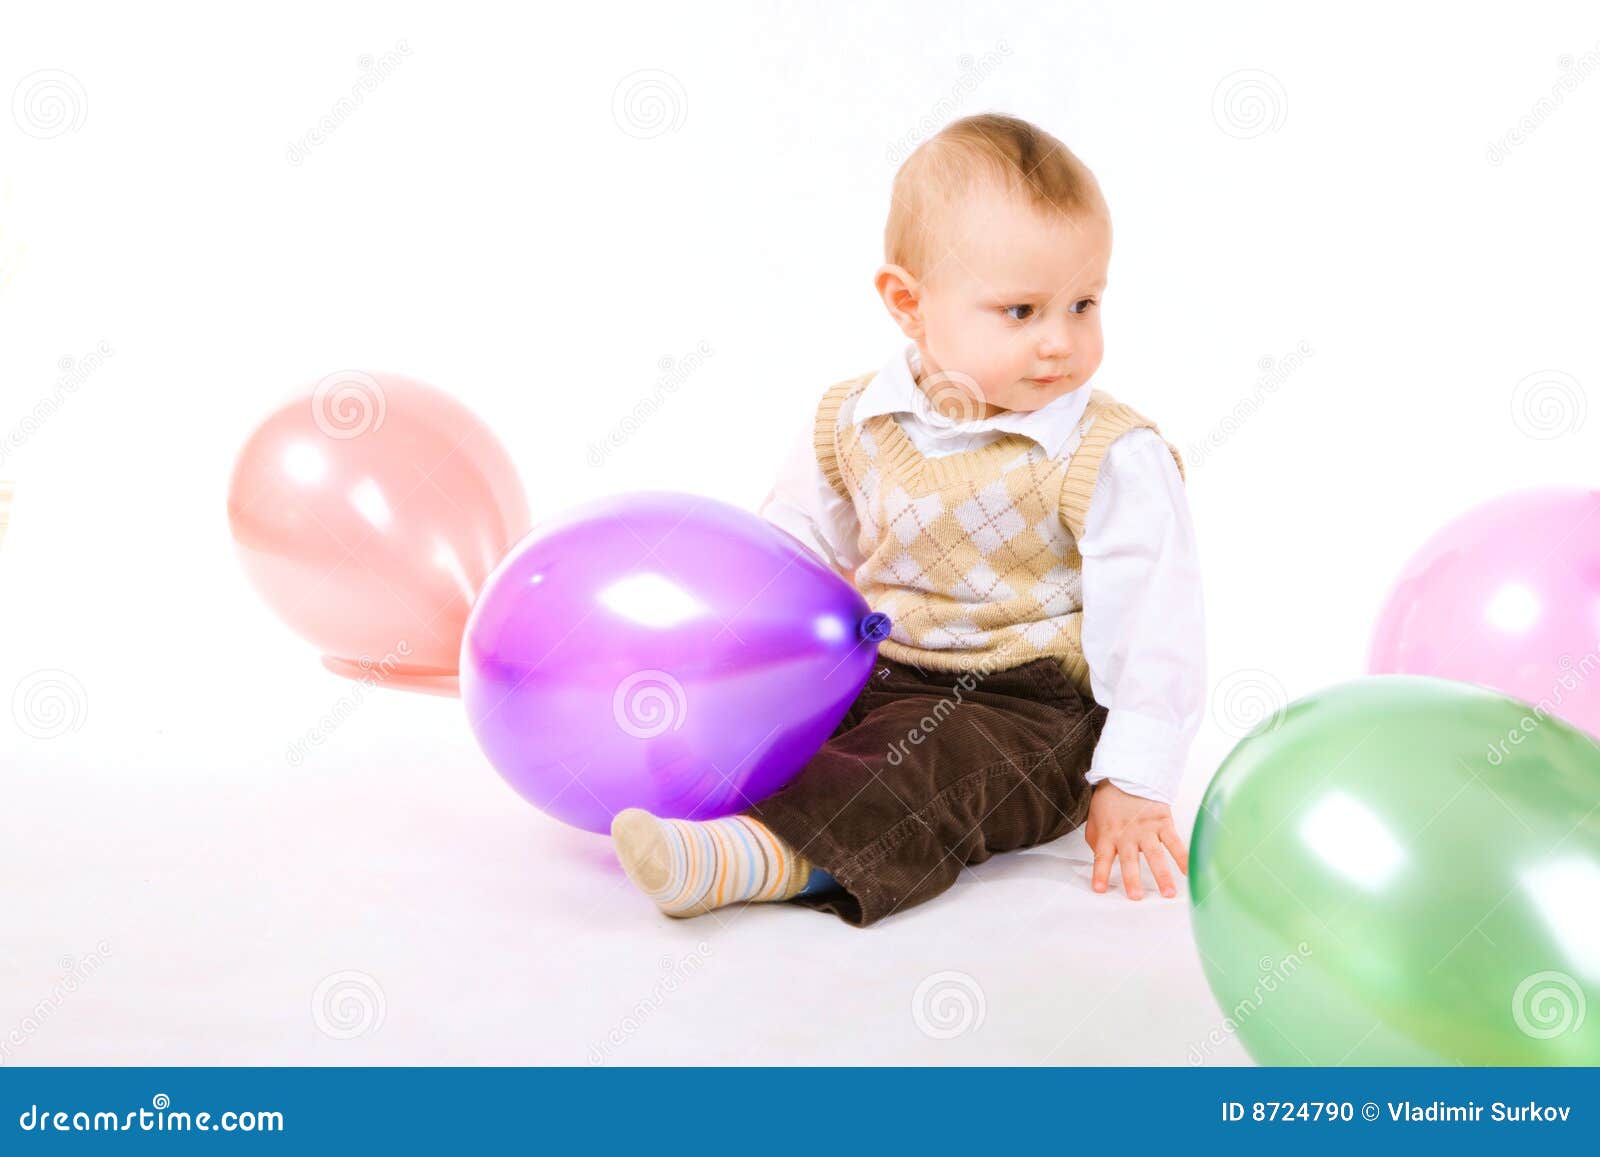 Boy with balloons stock photo. Image of play, balloon - 8724790